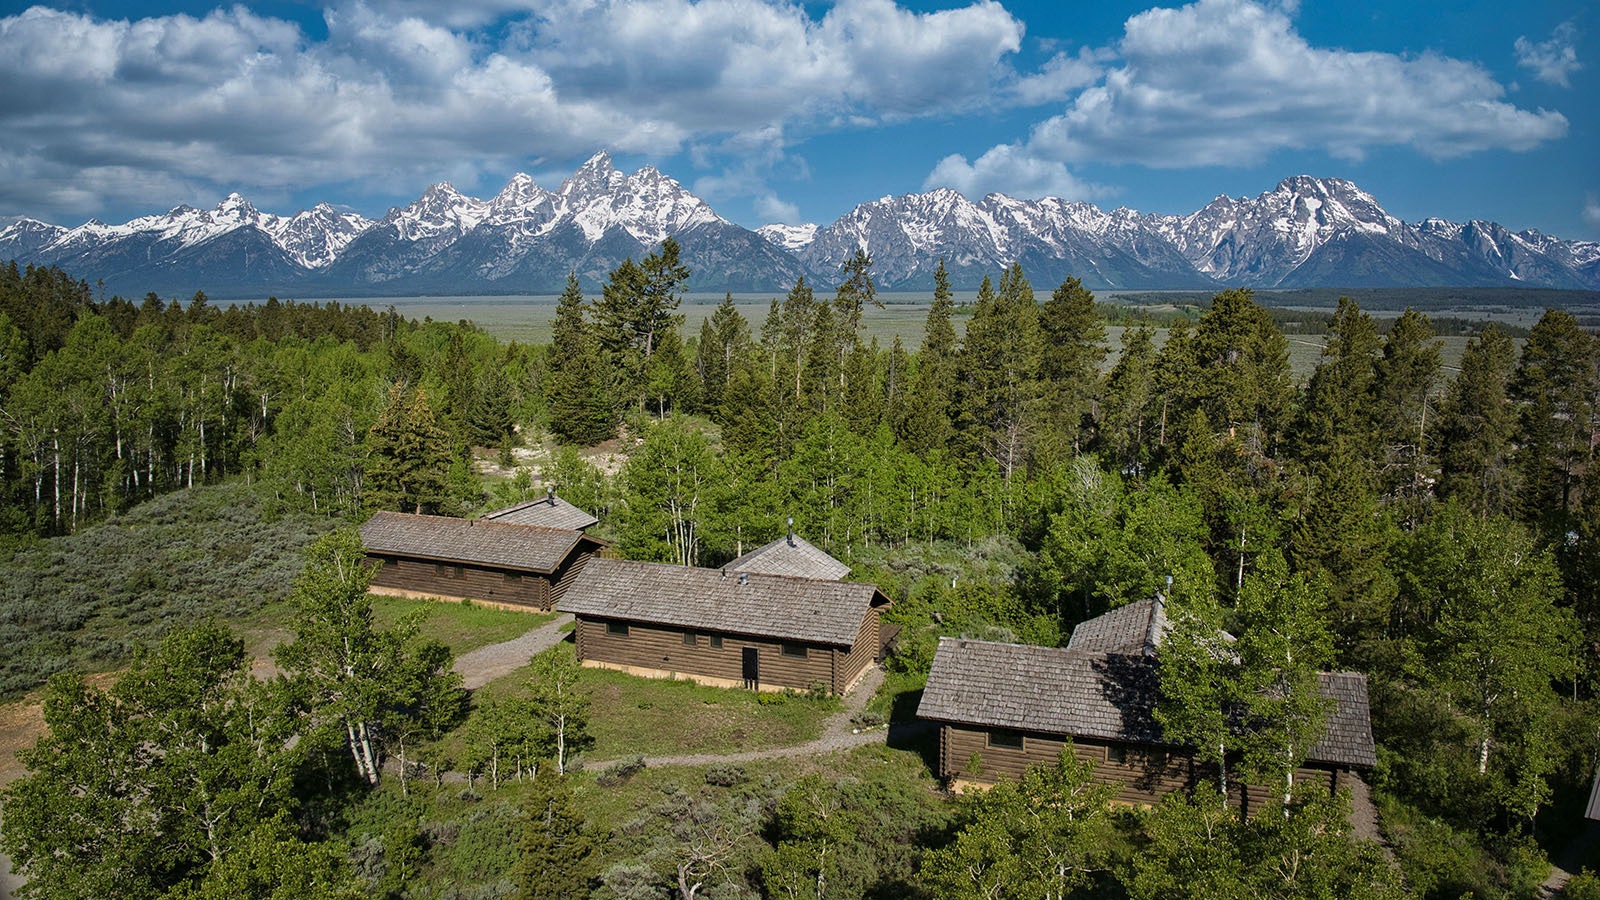 For the first time in a half-century, the historic Lost Creek Ranch in Teton County is for sale.